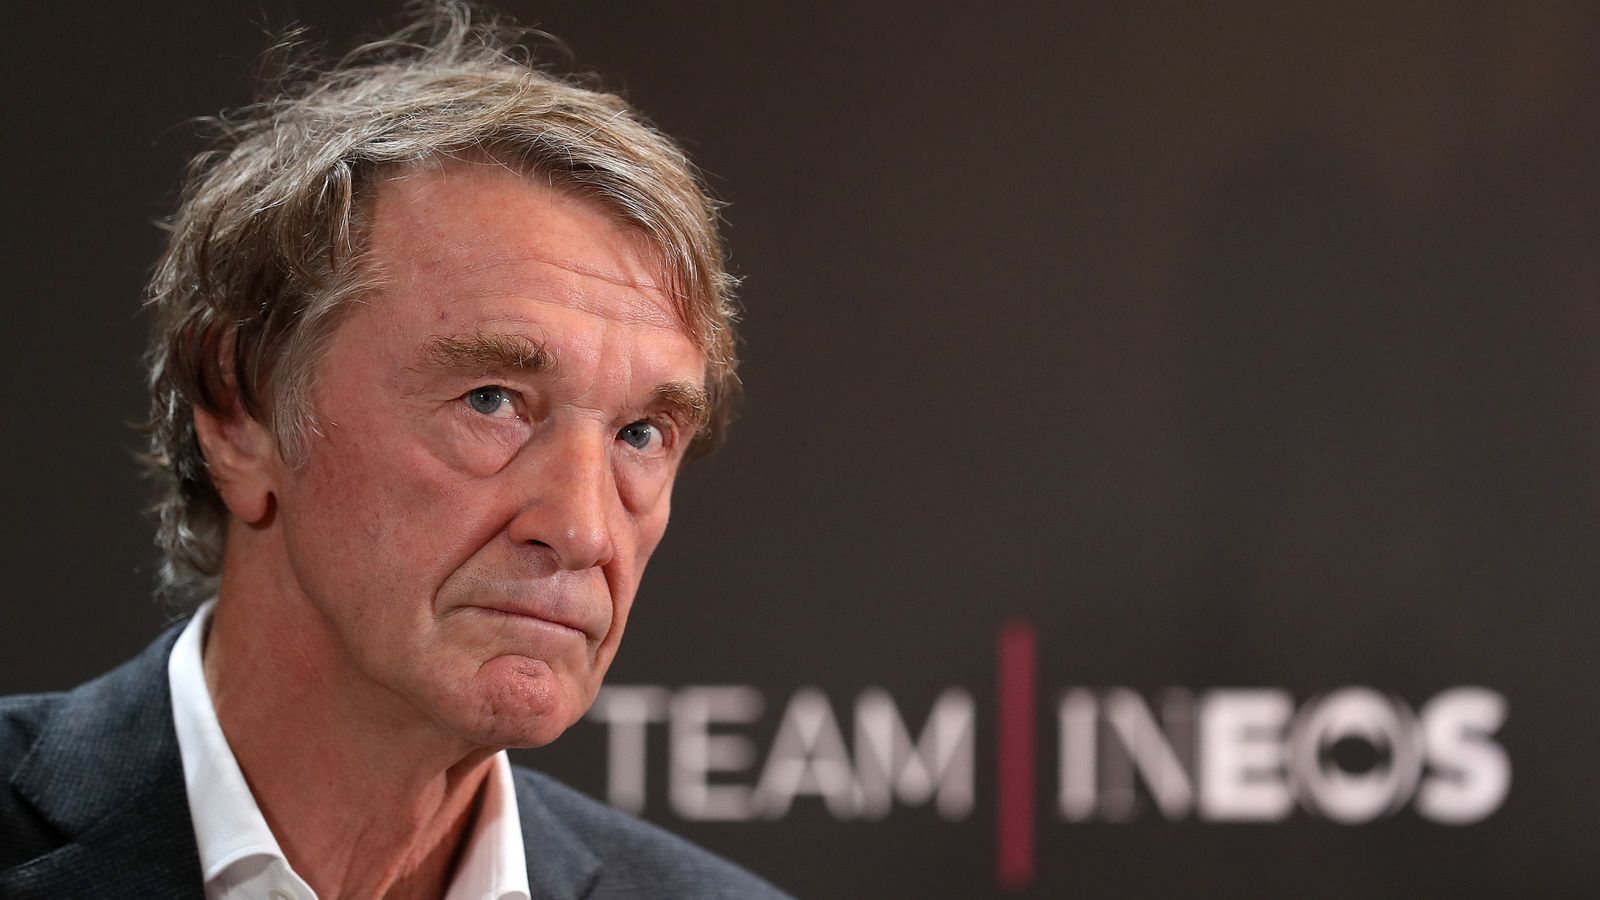 Manchester United: Billionaire Sir Jim Ratcliffe is interested in buying a stake in the club